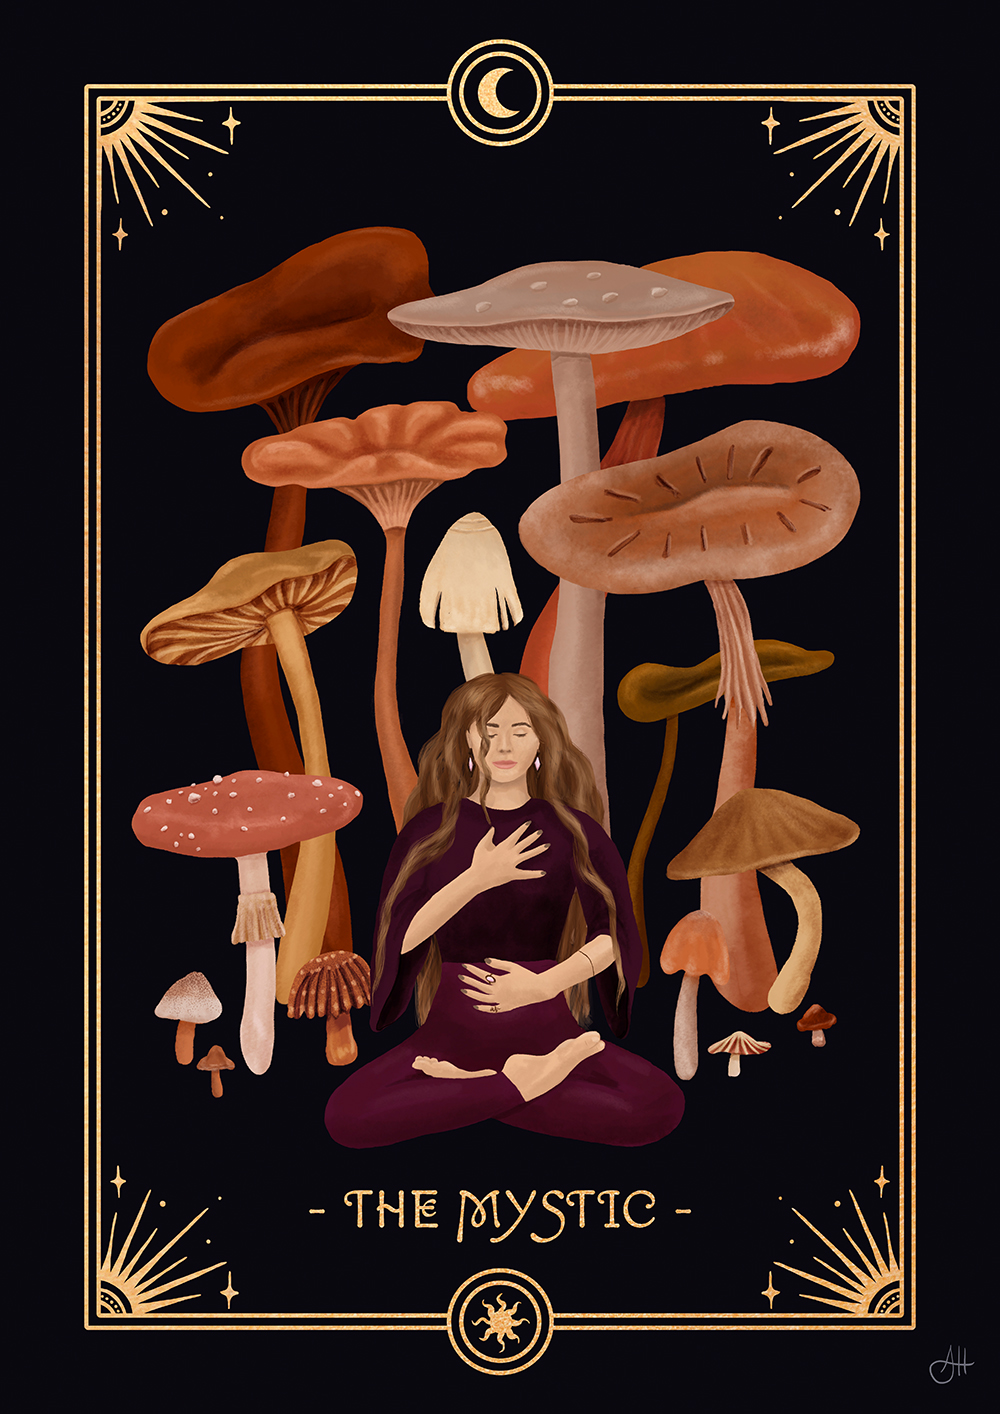 Illustrations of the 7 Feminine Archetypes by Anna Heimkreiter. "The Mystic" shows a woman practicing meditation under giant mushrooms.